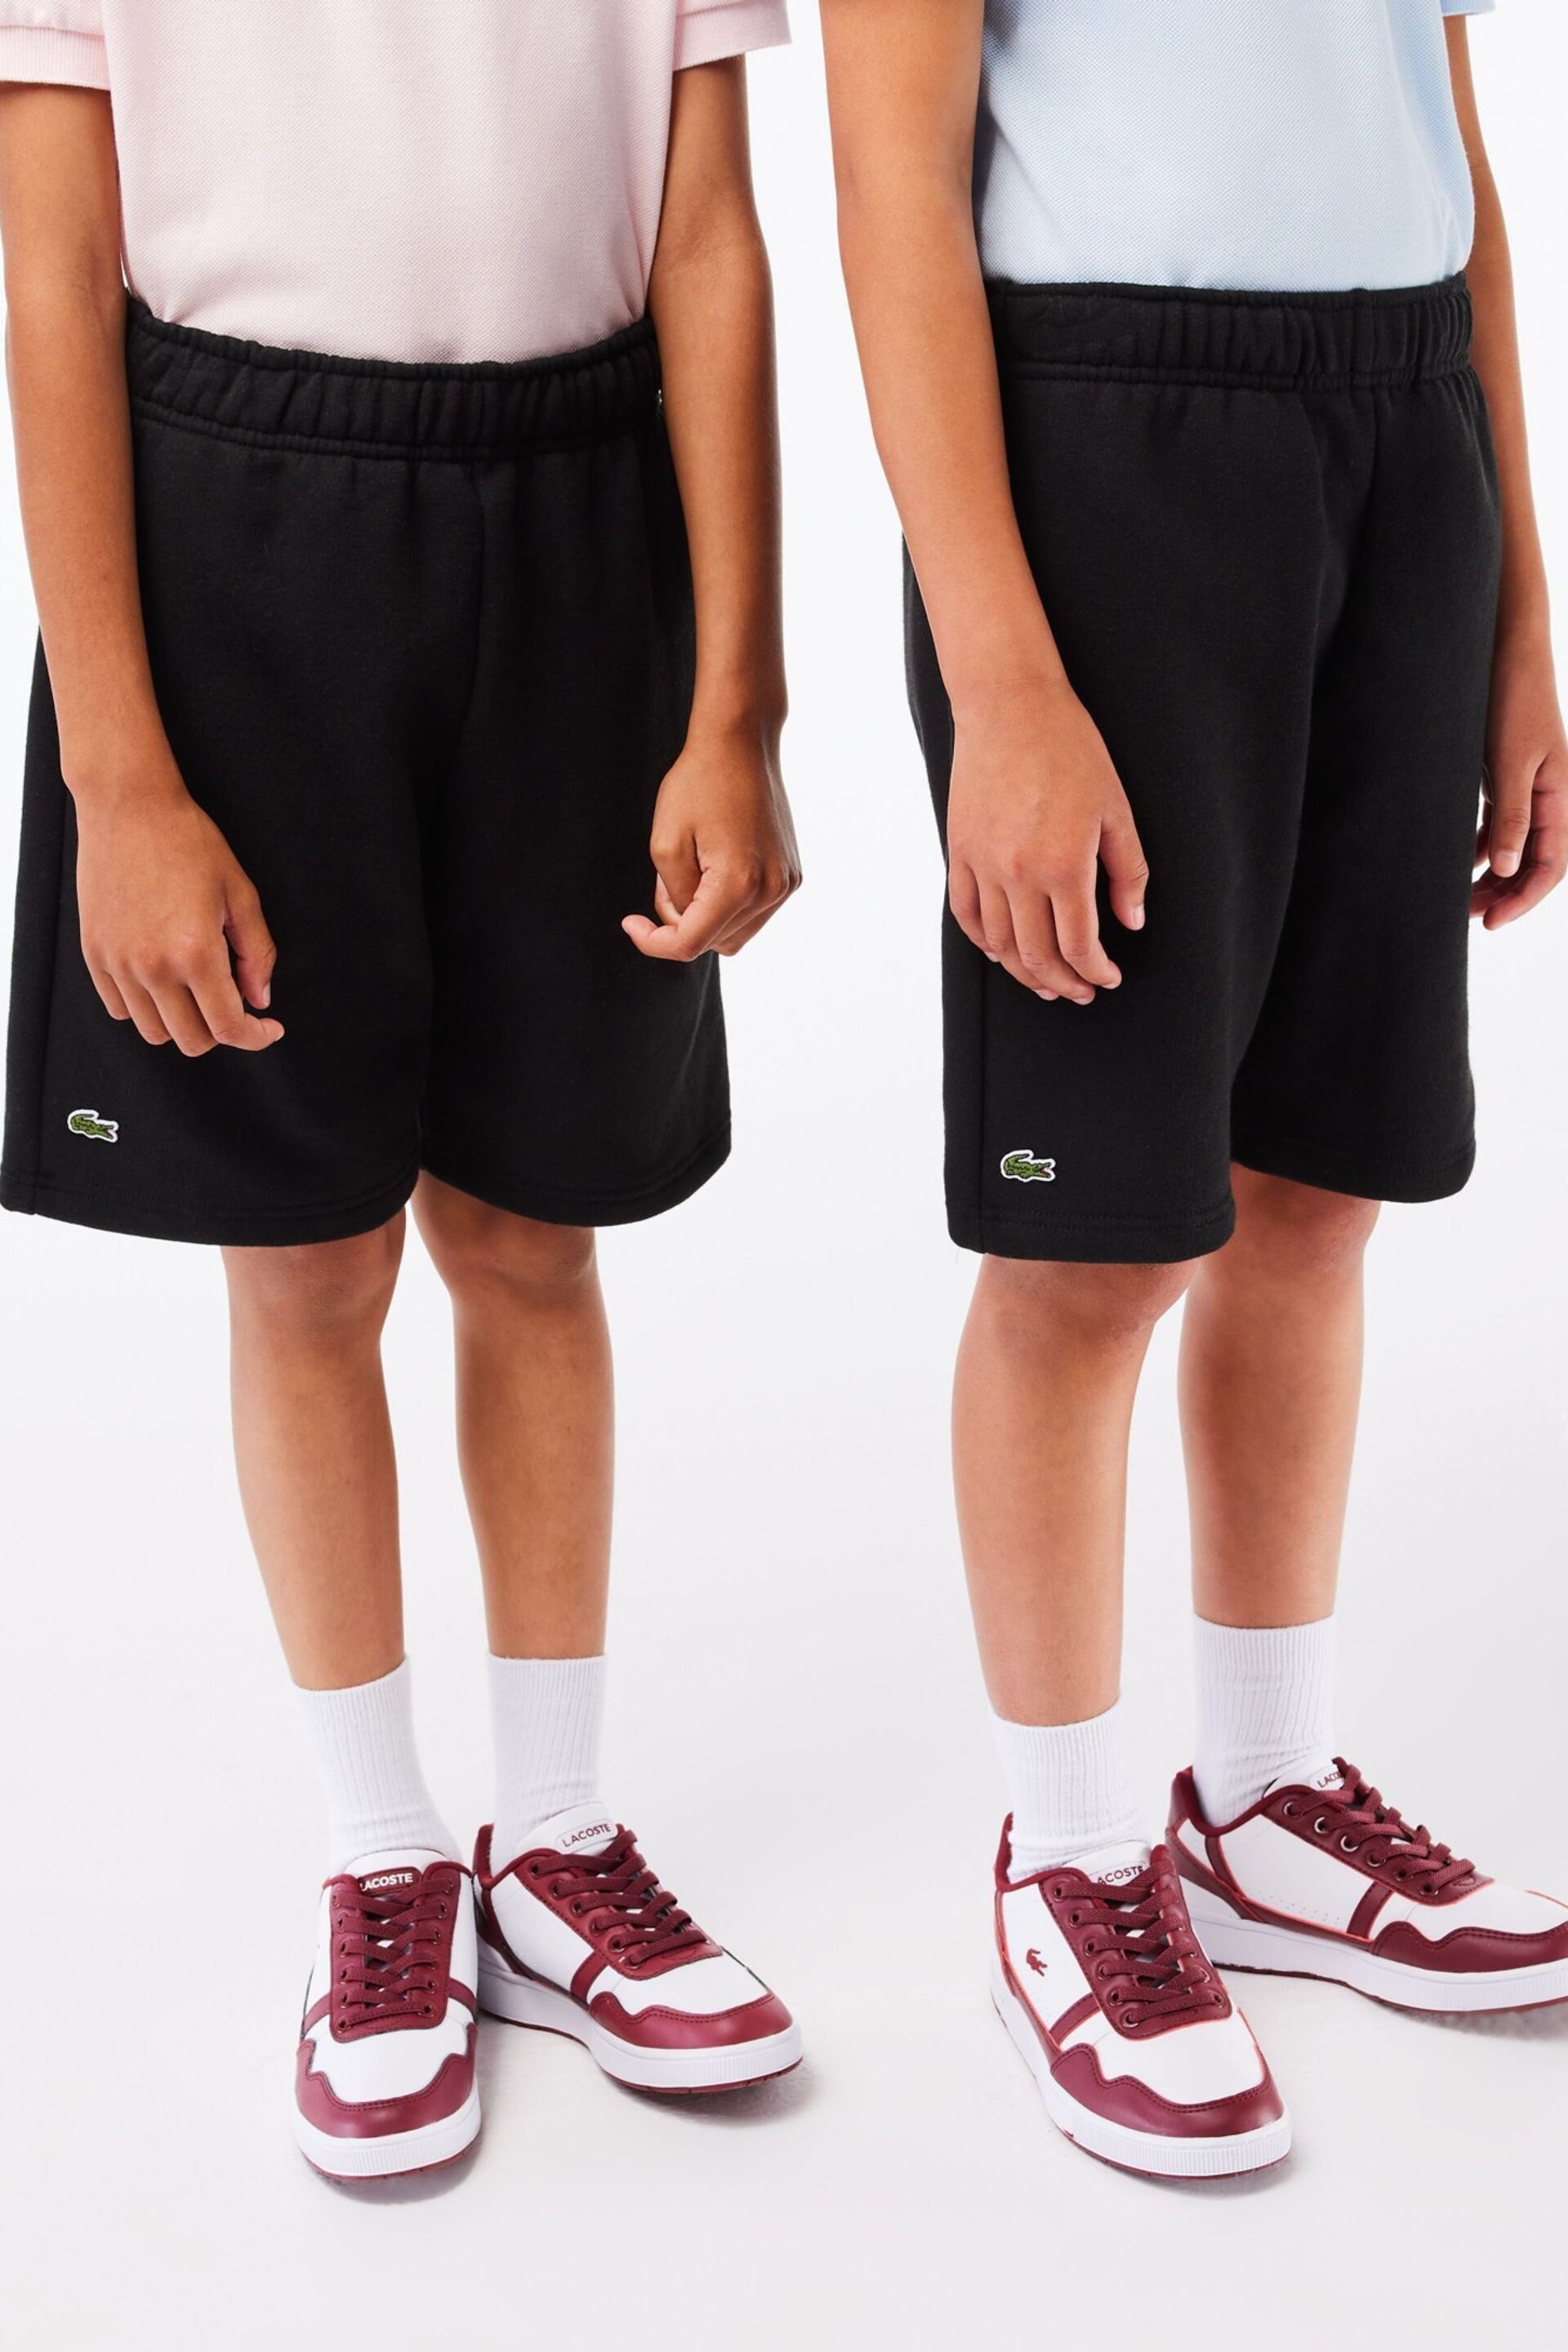 Lacoste Childrens Brushed Cotton Jersey Shorts - Image 2 of 4